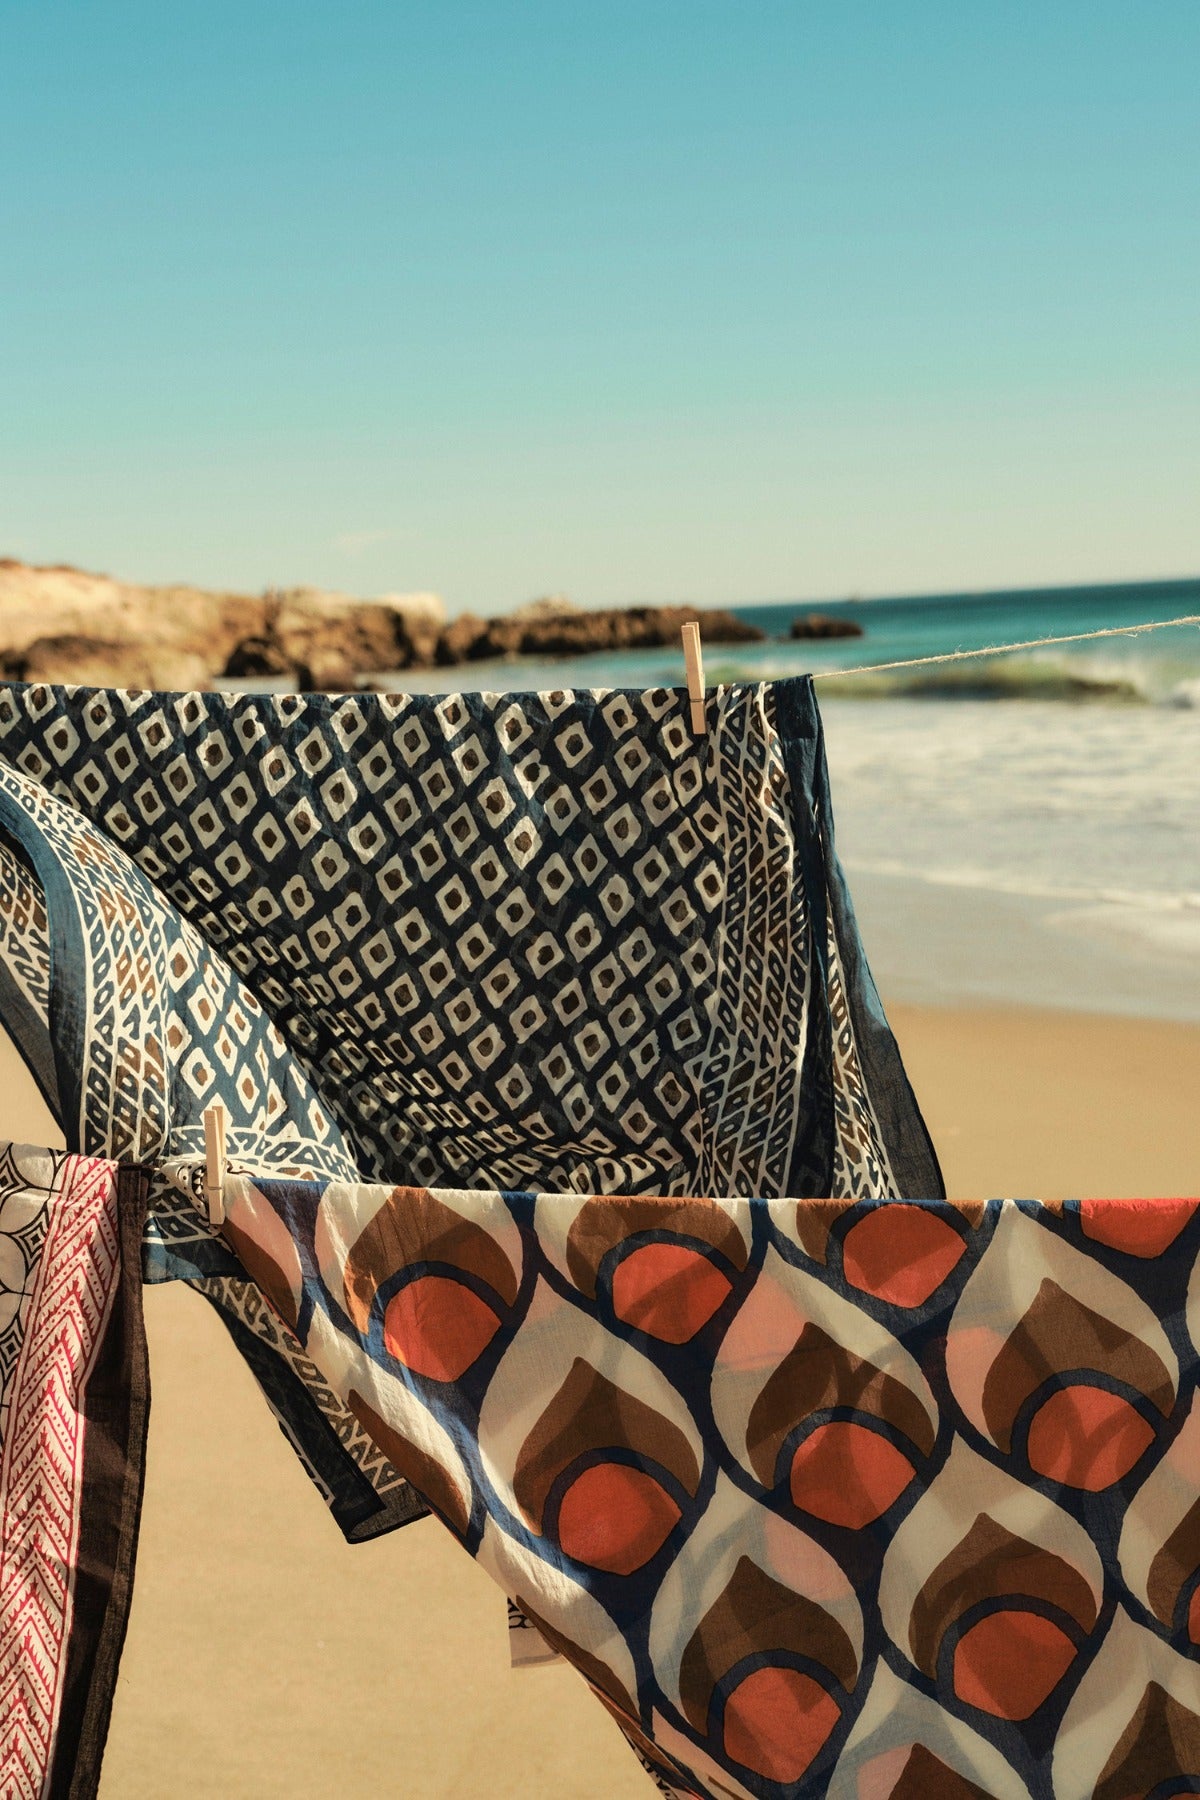 Patterned Velvet by Graham & Spencer SARONG WRAP facing the ocean with waves crashing and rocks in the distance, under a clear blue sky.-36752756113601